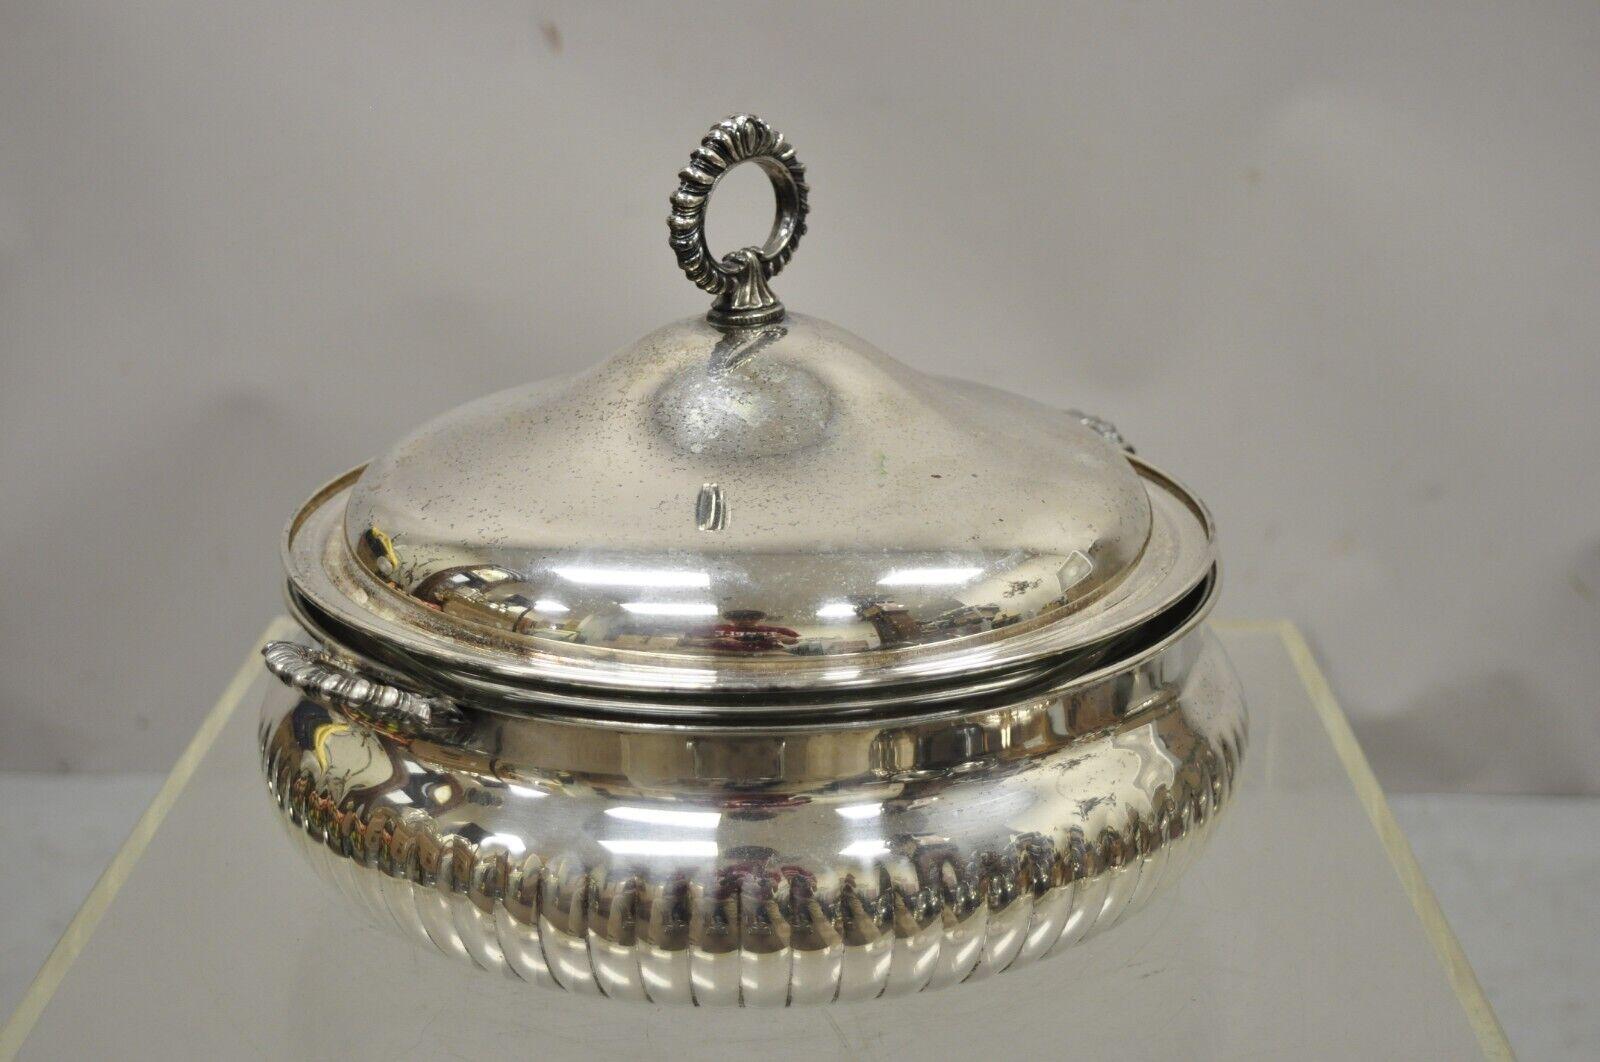 W&SB 195 silver plate covered platter serving tray dish bowl. Item features pyrex glass liner, ornate domed lid, twin handles, flat base, original stamp. mid 20th century. Measurements: 9